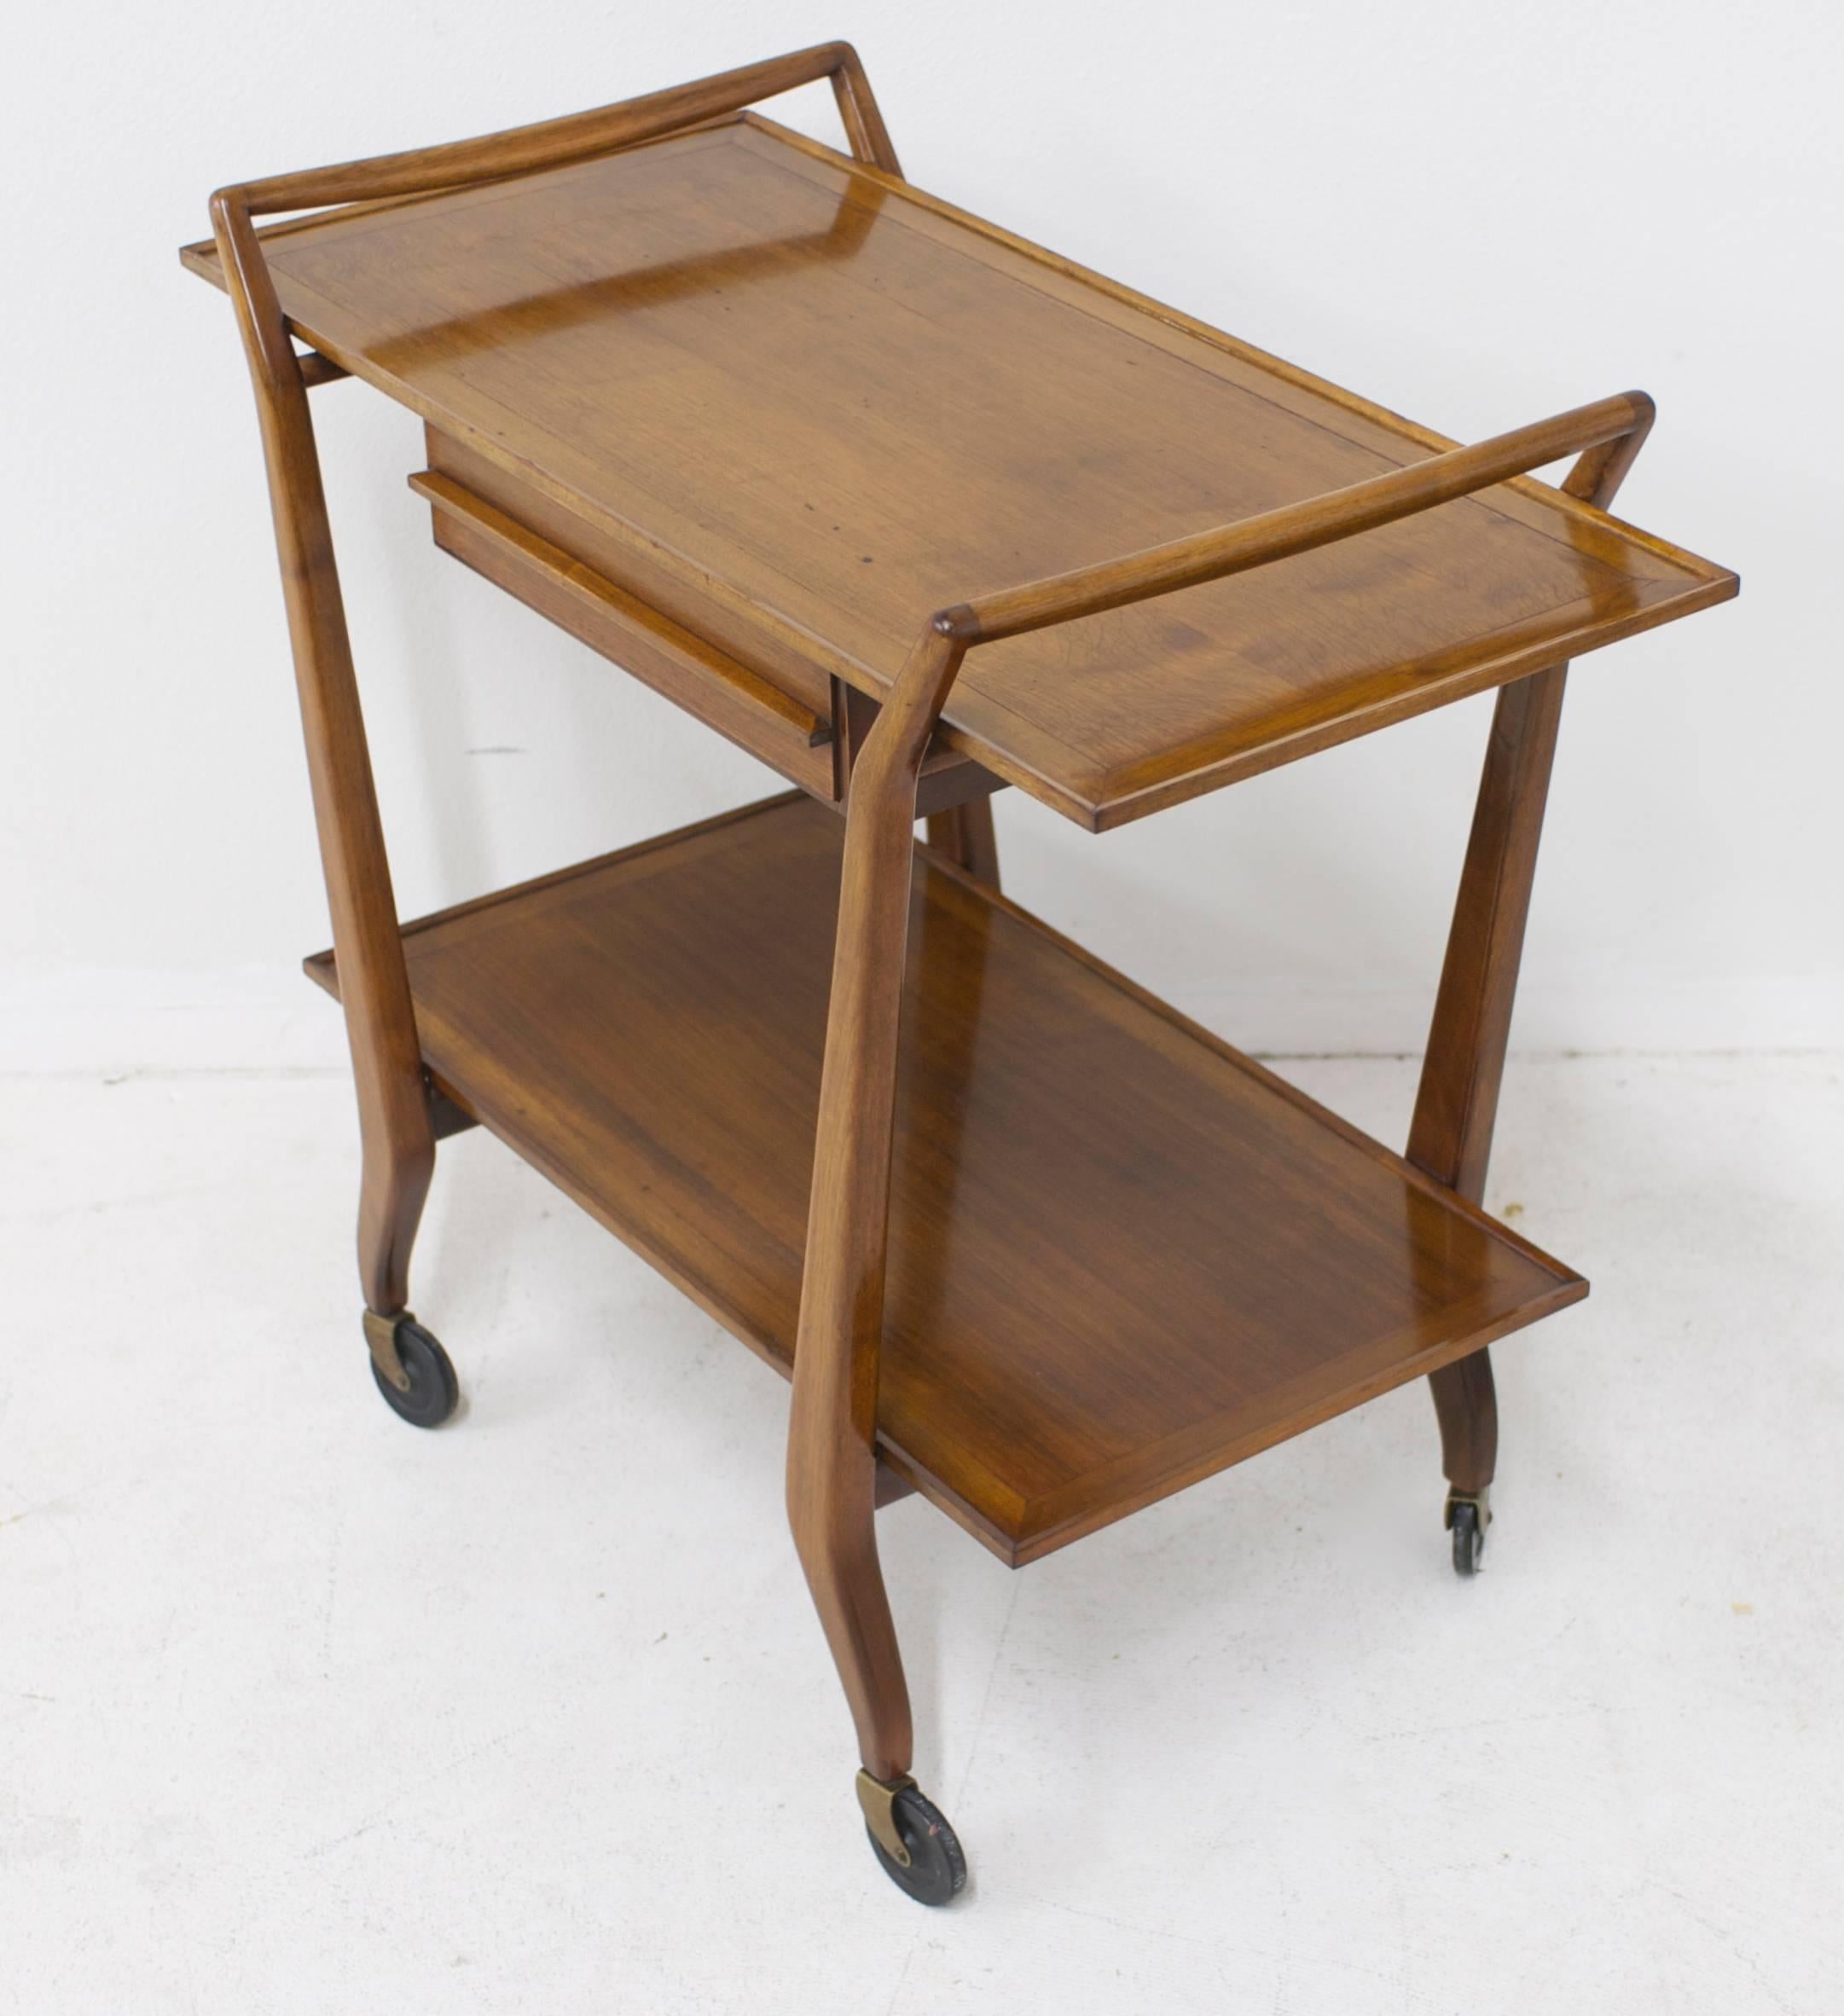 An elegant vintage bar cart made of what appears to be walnut. The two-tiered trolley has a drawer on the top which is accessible from both sides of the cart.
The lower shelf is 12